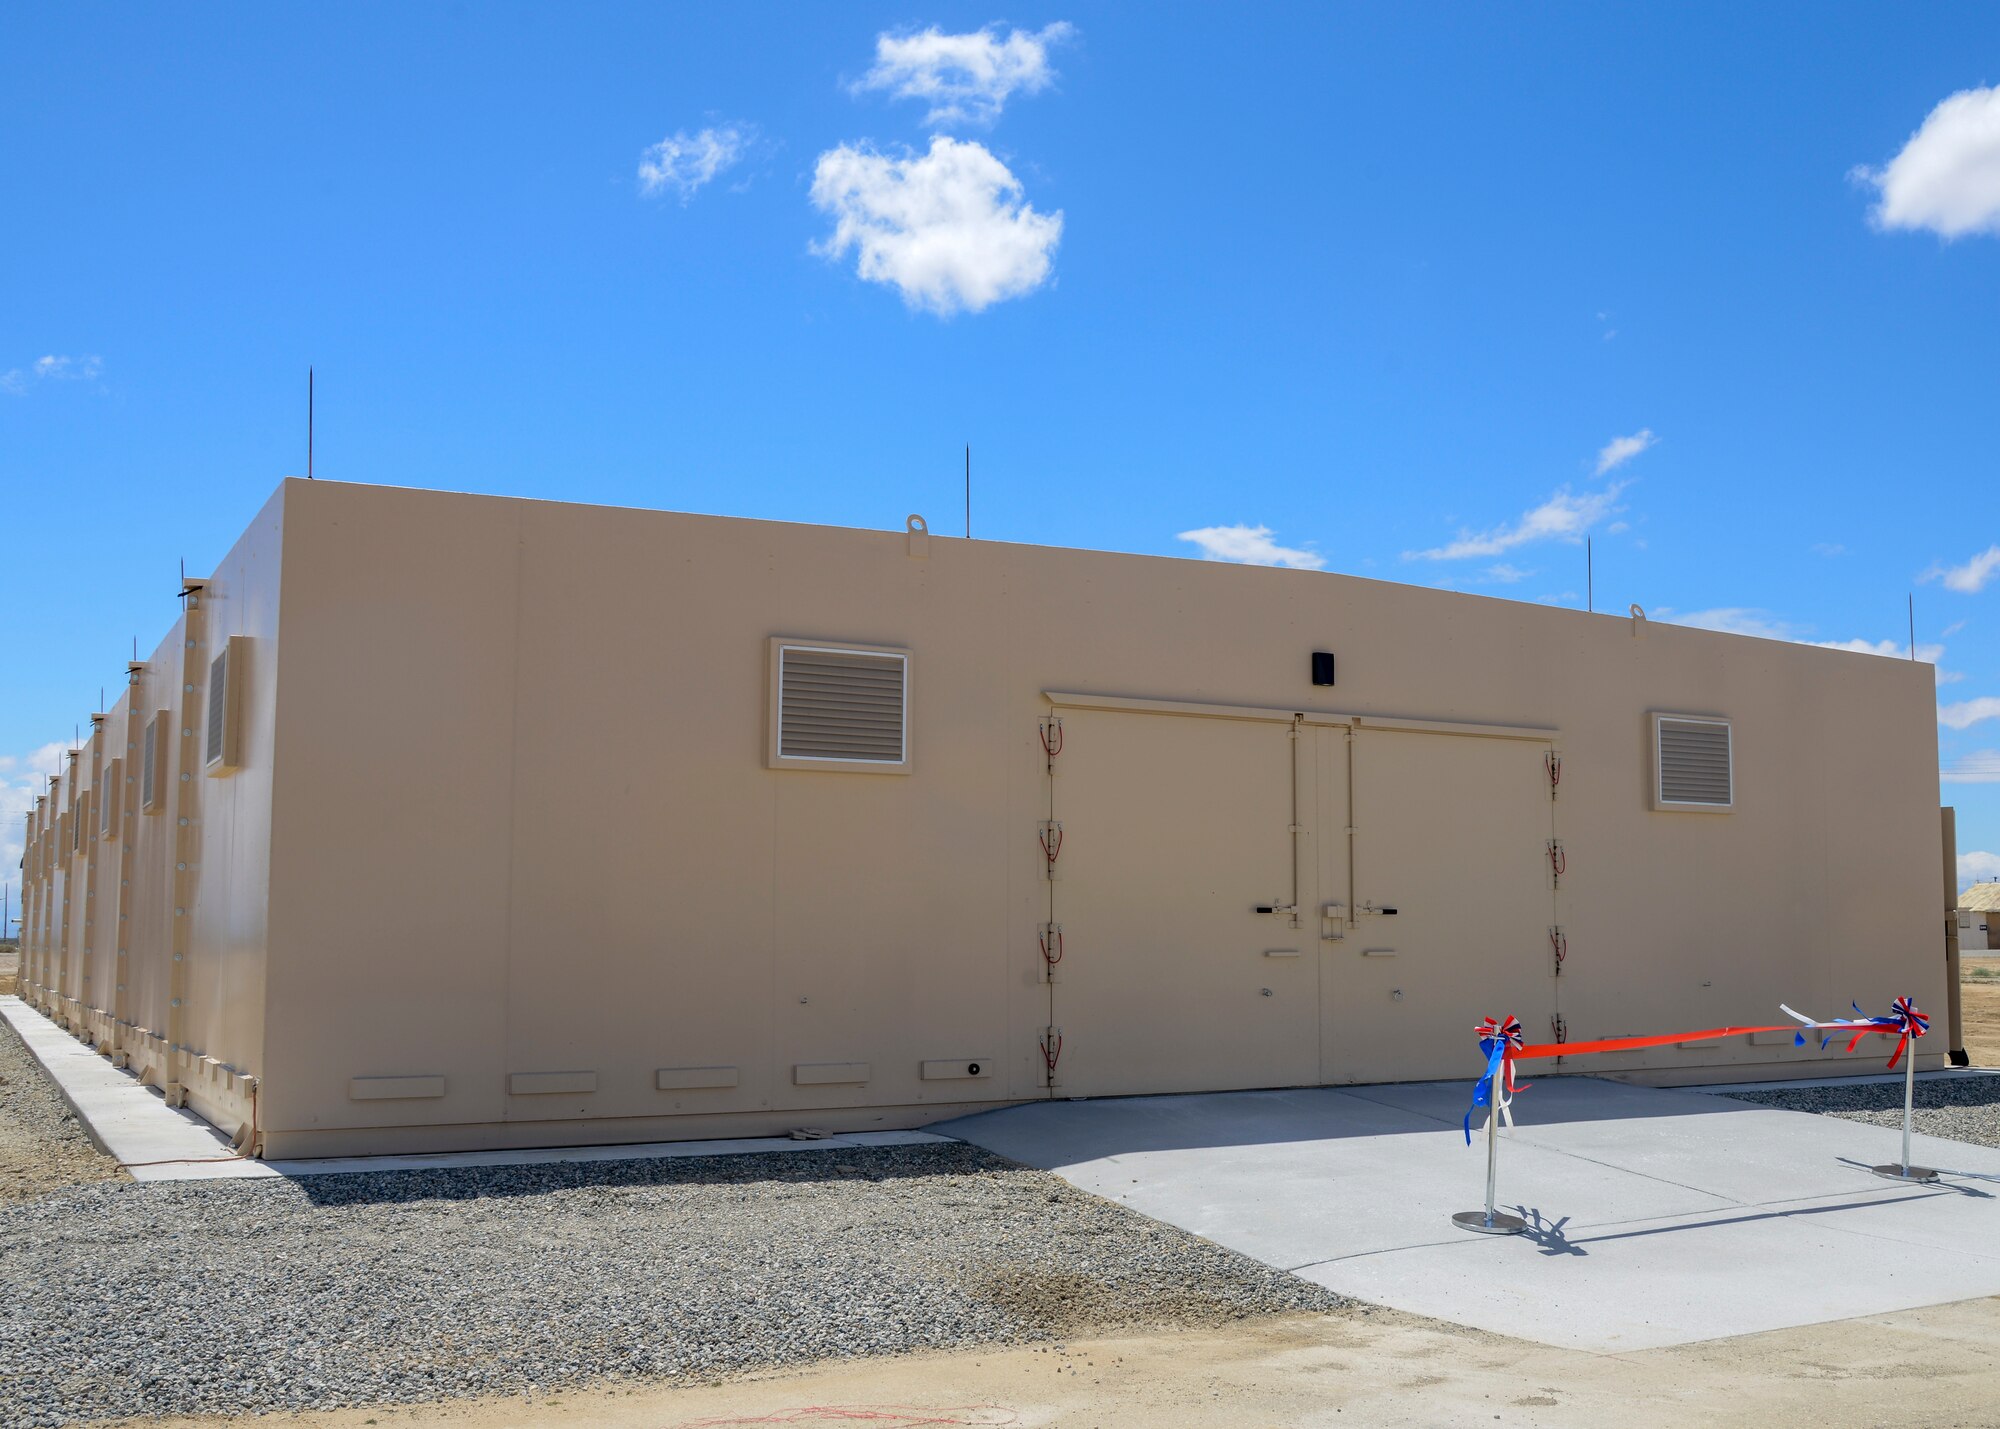 The new munitions bunker is 5,000 square feet and includes eight modular sections. The ribbon cutting ceremony took place at Edwards Air Force Base, Calif. May 16. (U.S. Air Force photo by Giancarlo Casem)